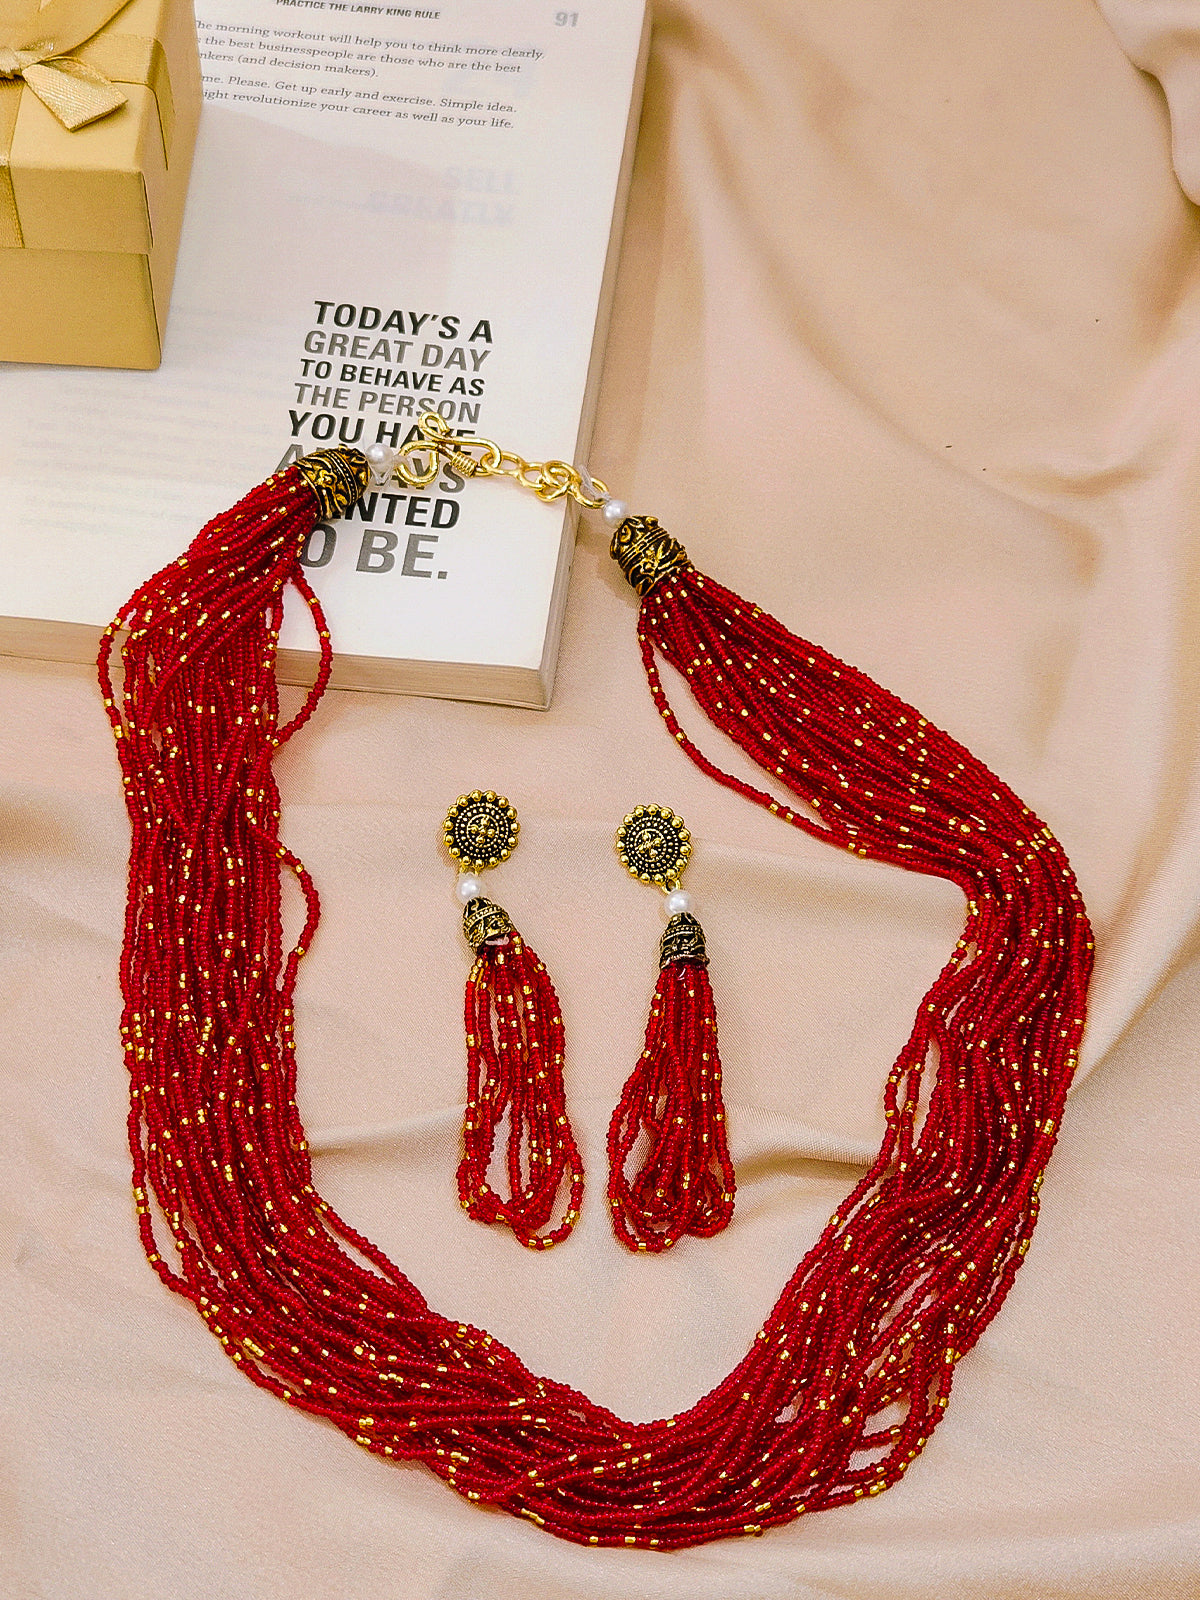 Moti Jhalar Necklace Set | Maroon-colour Beads Necklace & Earrings for Parties & Office Going Women from House of Mrigaya by Nandini - Maroon - Mrigaya India